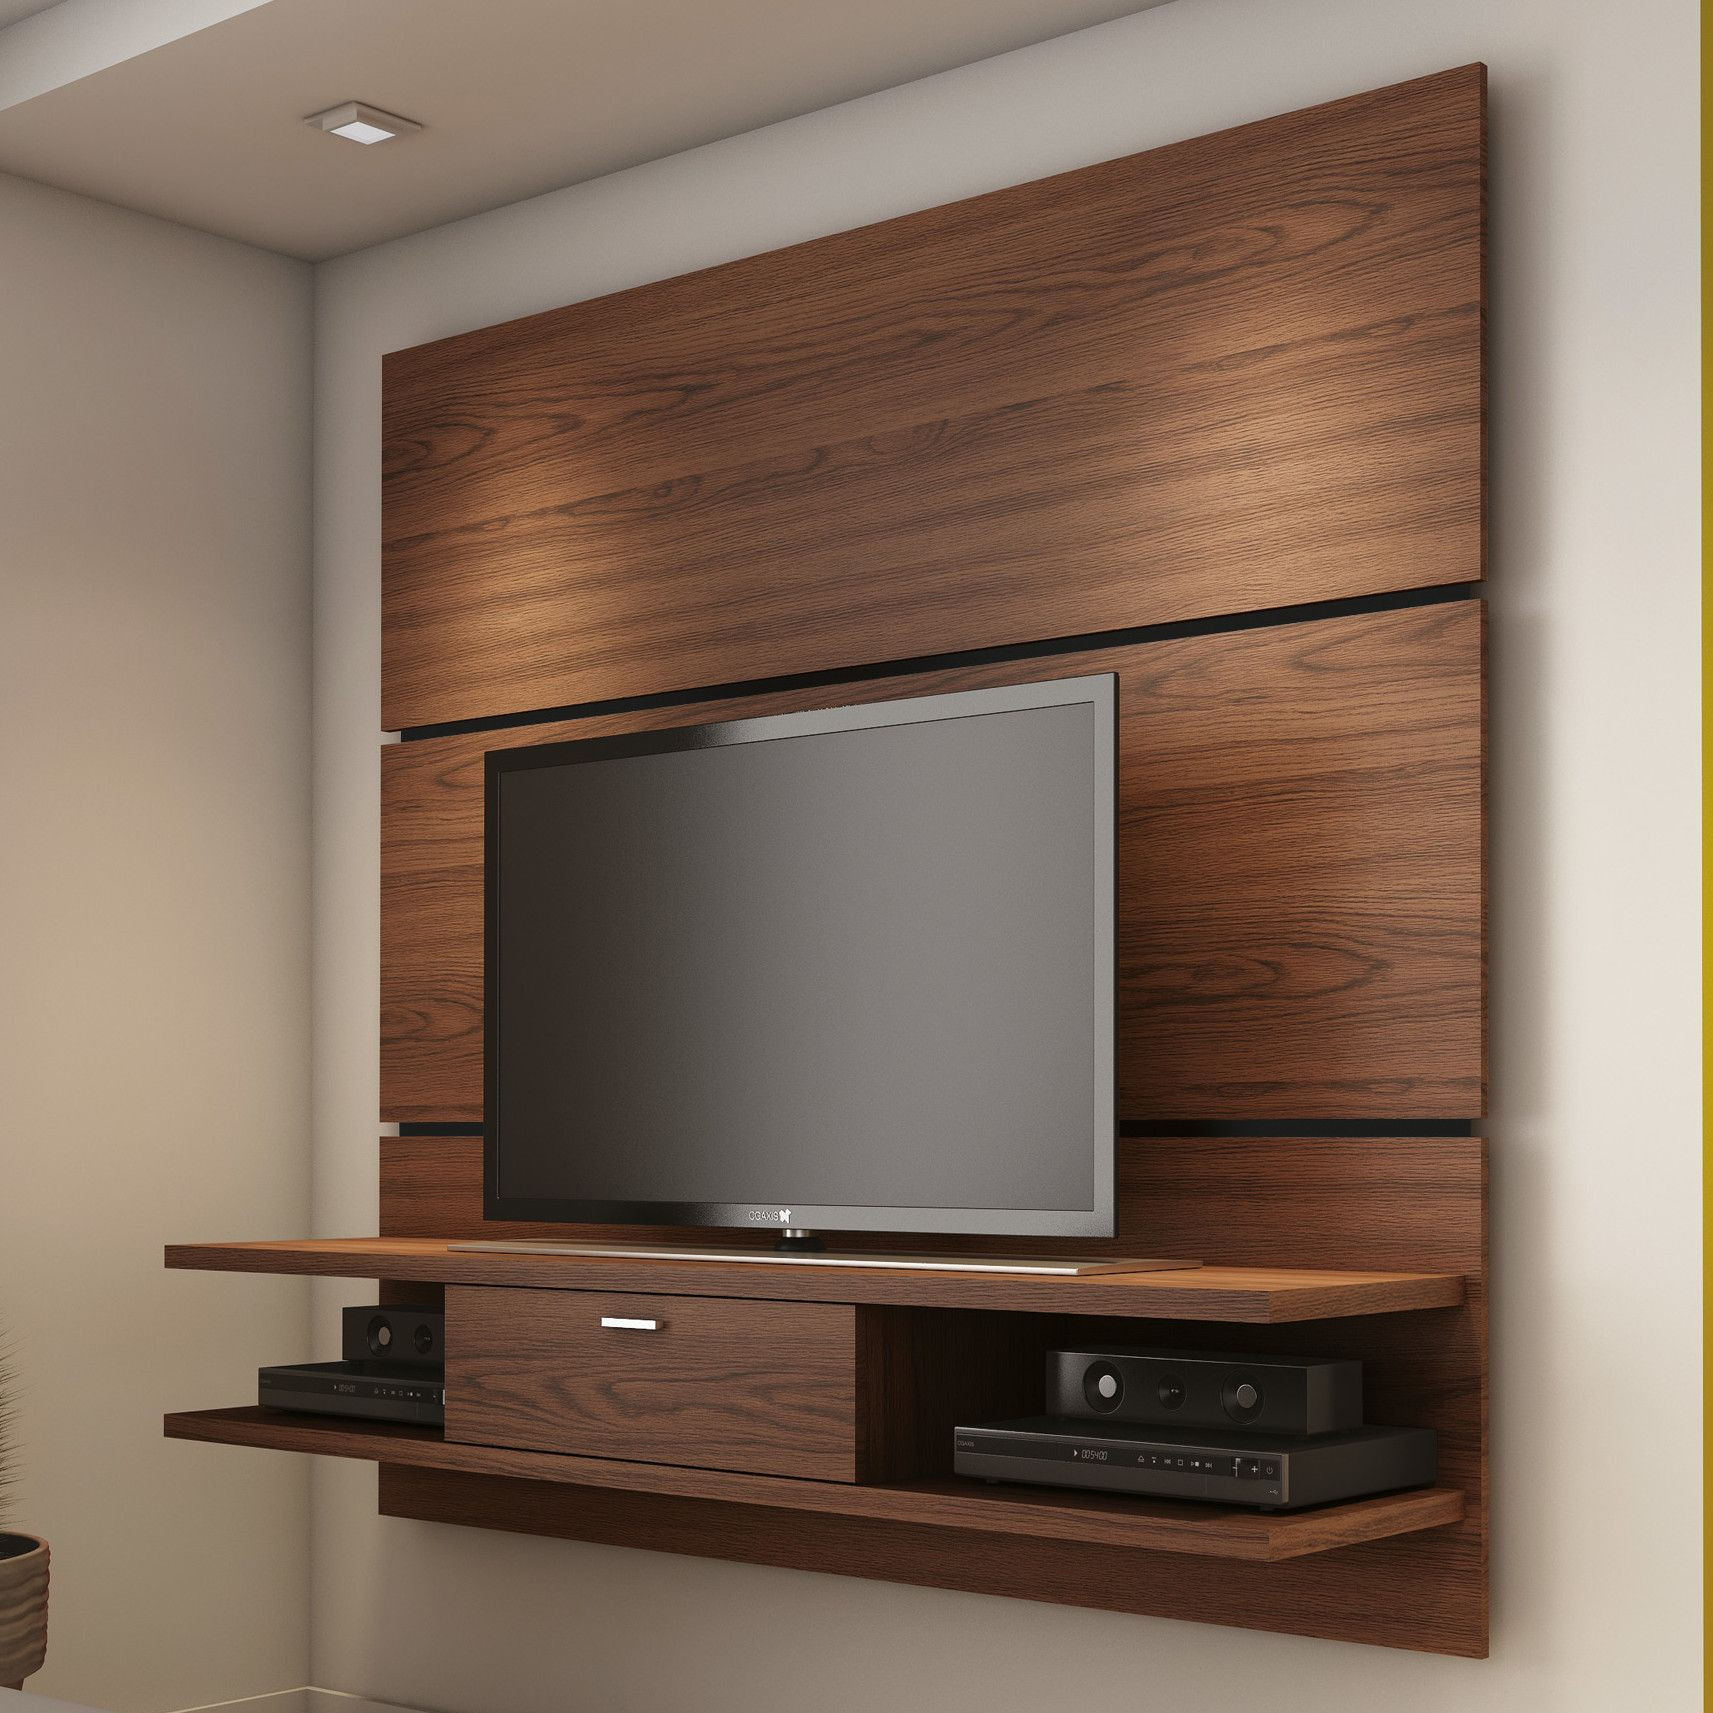 Small Tv For Bedroom
 Small Bedroom Tv Unit Wooden Wall Mounted Tv Stand For